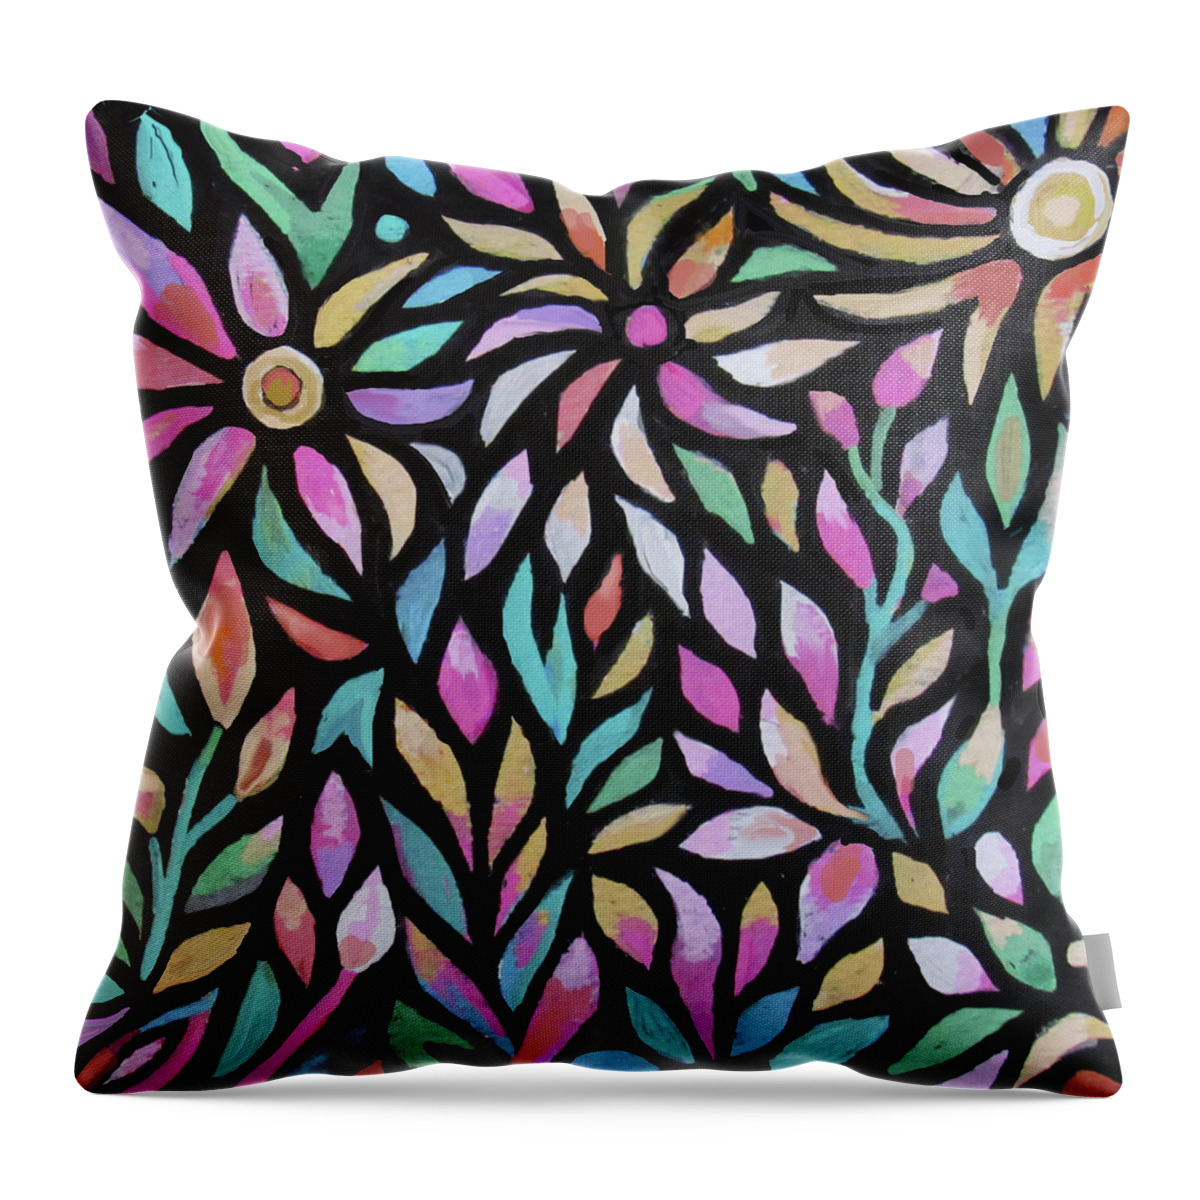 Flower Pattern Throw Pillow featuring the painting Flower Pattern 77 by Jean Batzell Fitzgerald